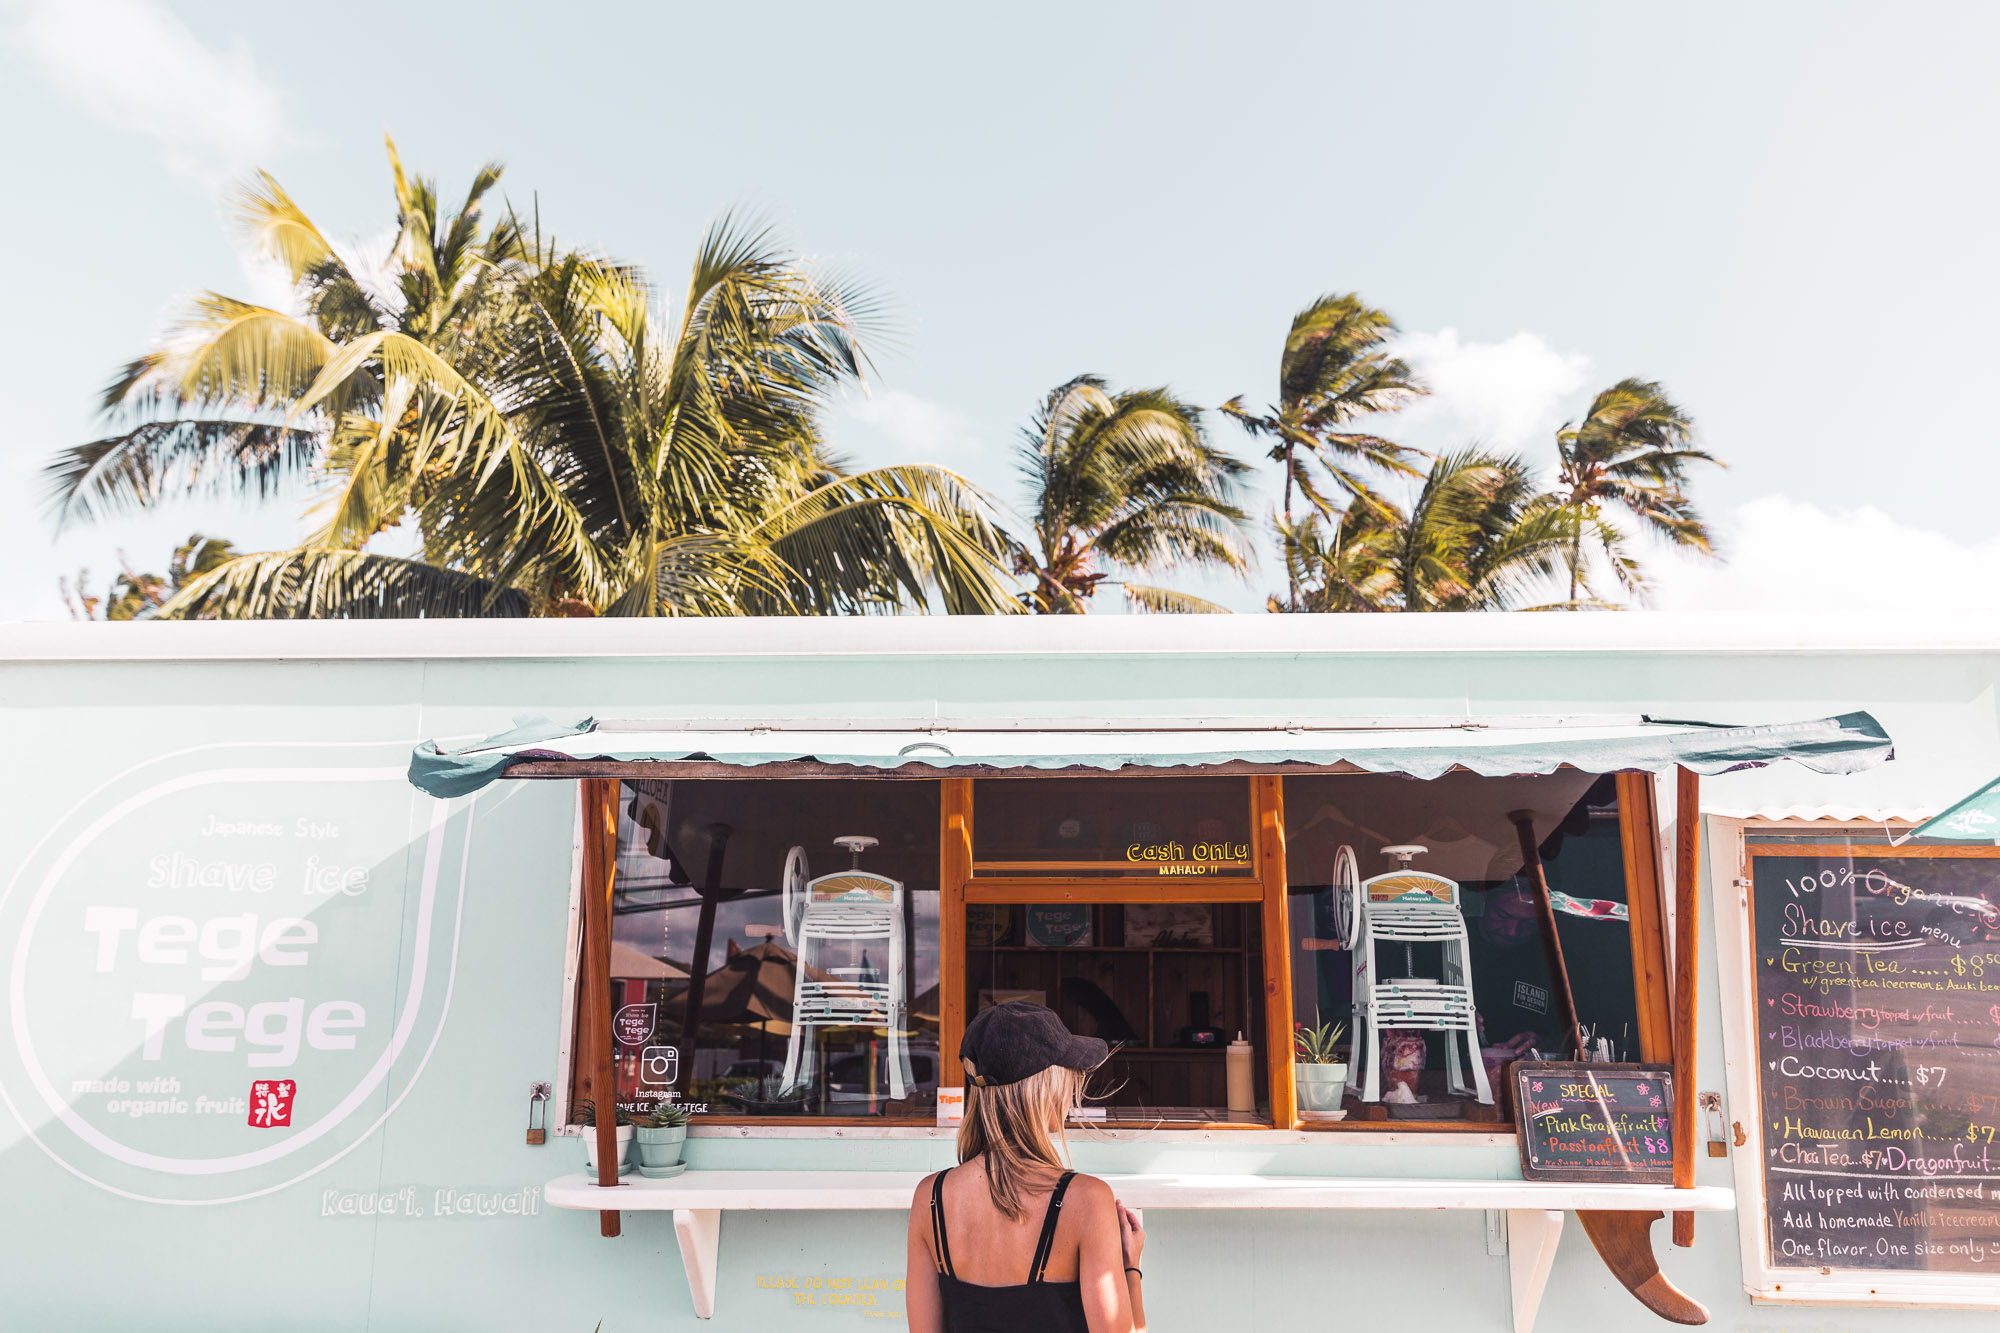 Tege Tege Shave Ice Truck For Delicious Organic Fruit Ice Kauai Hawaii Travel Guide via Find Us Lost